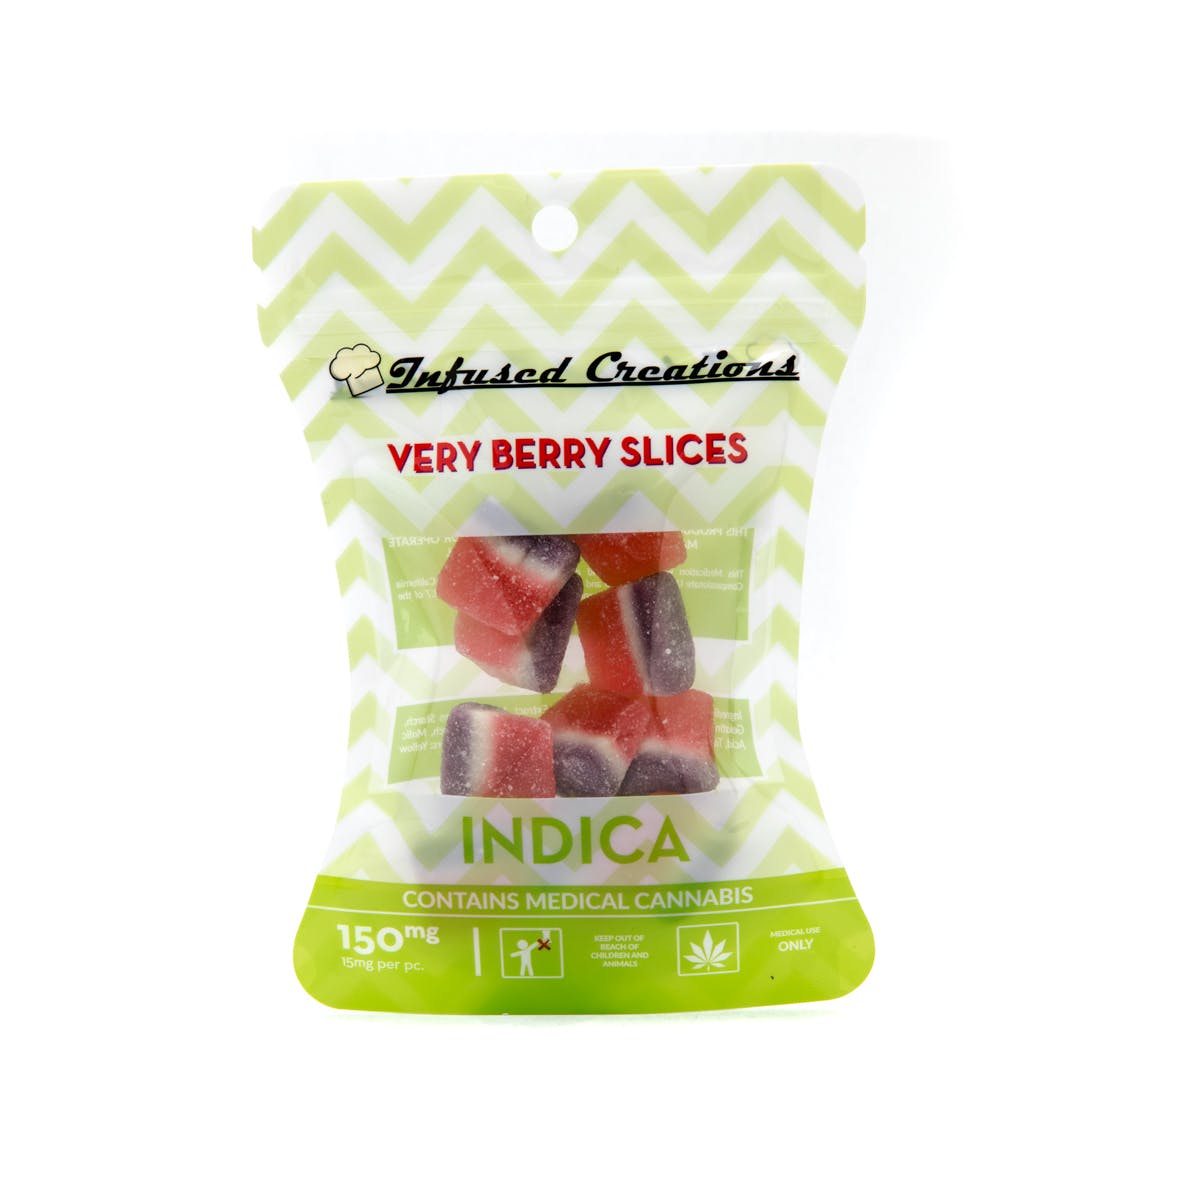 Very Berry Slices Indica, 150mg